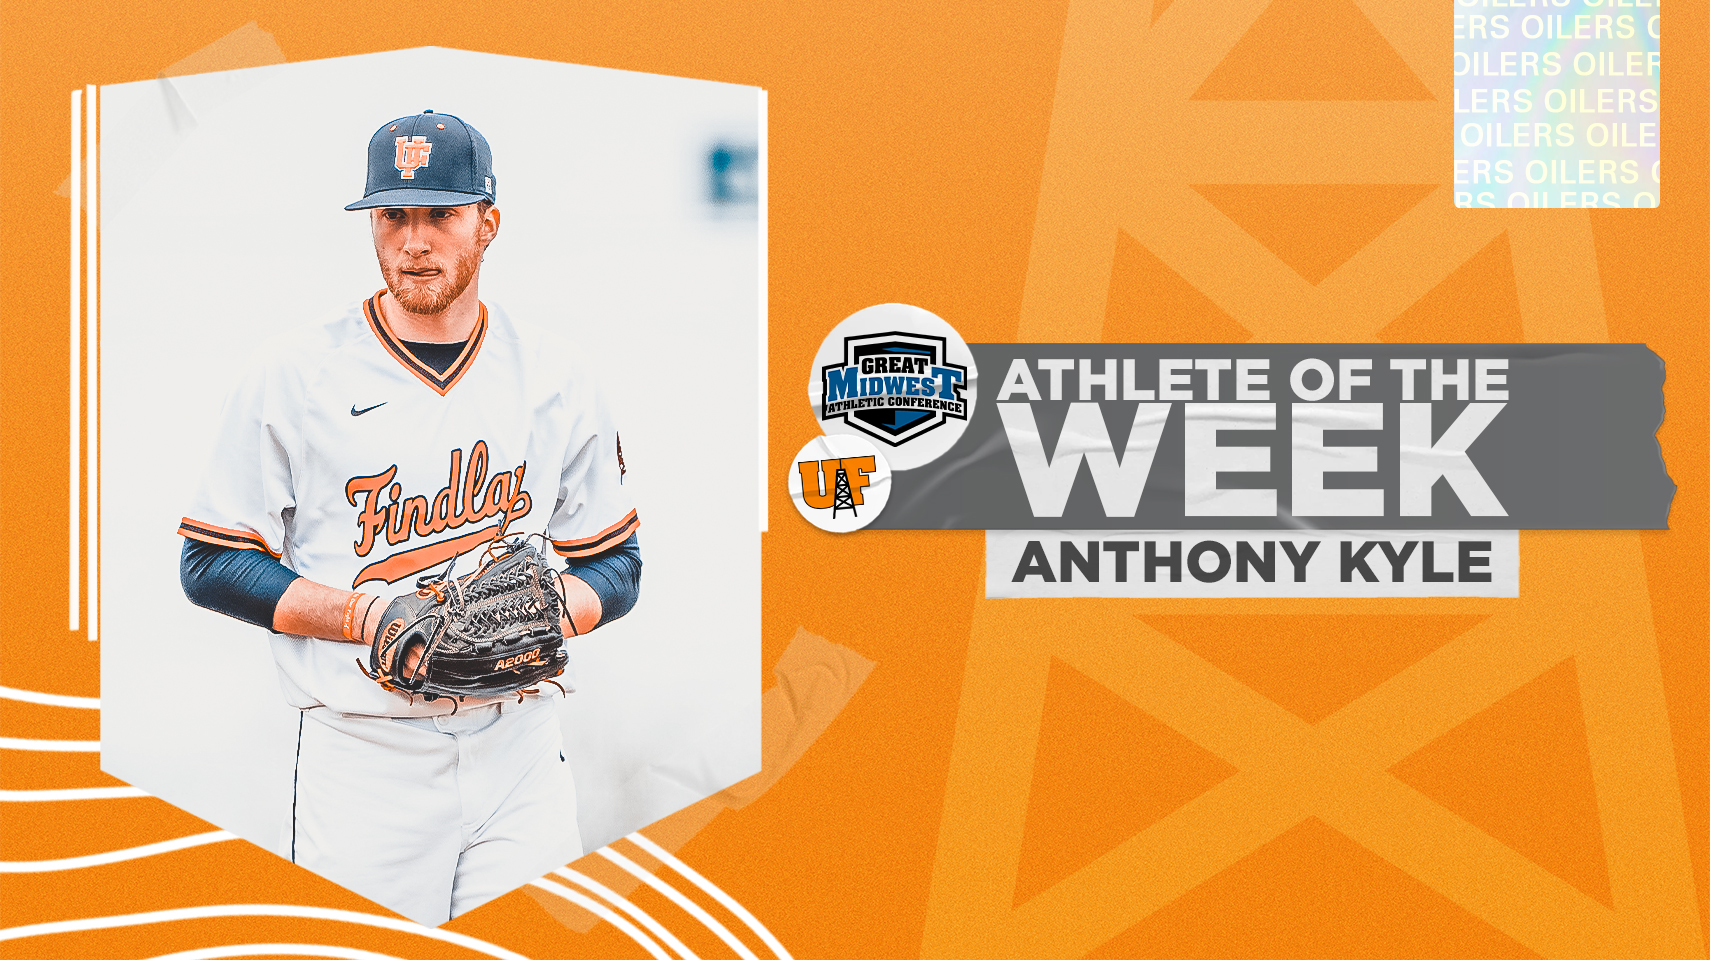 athlete of the week graphic